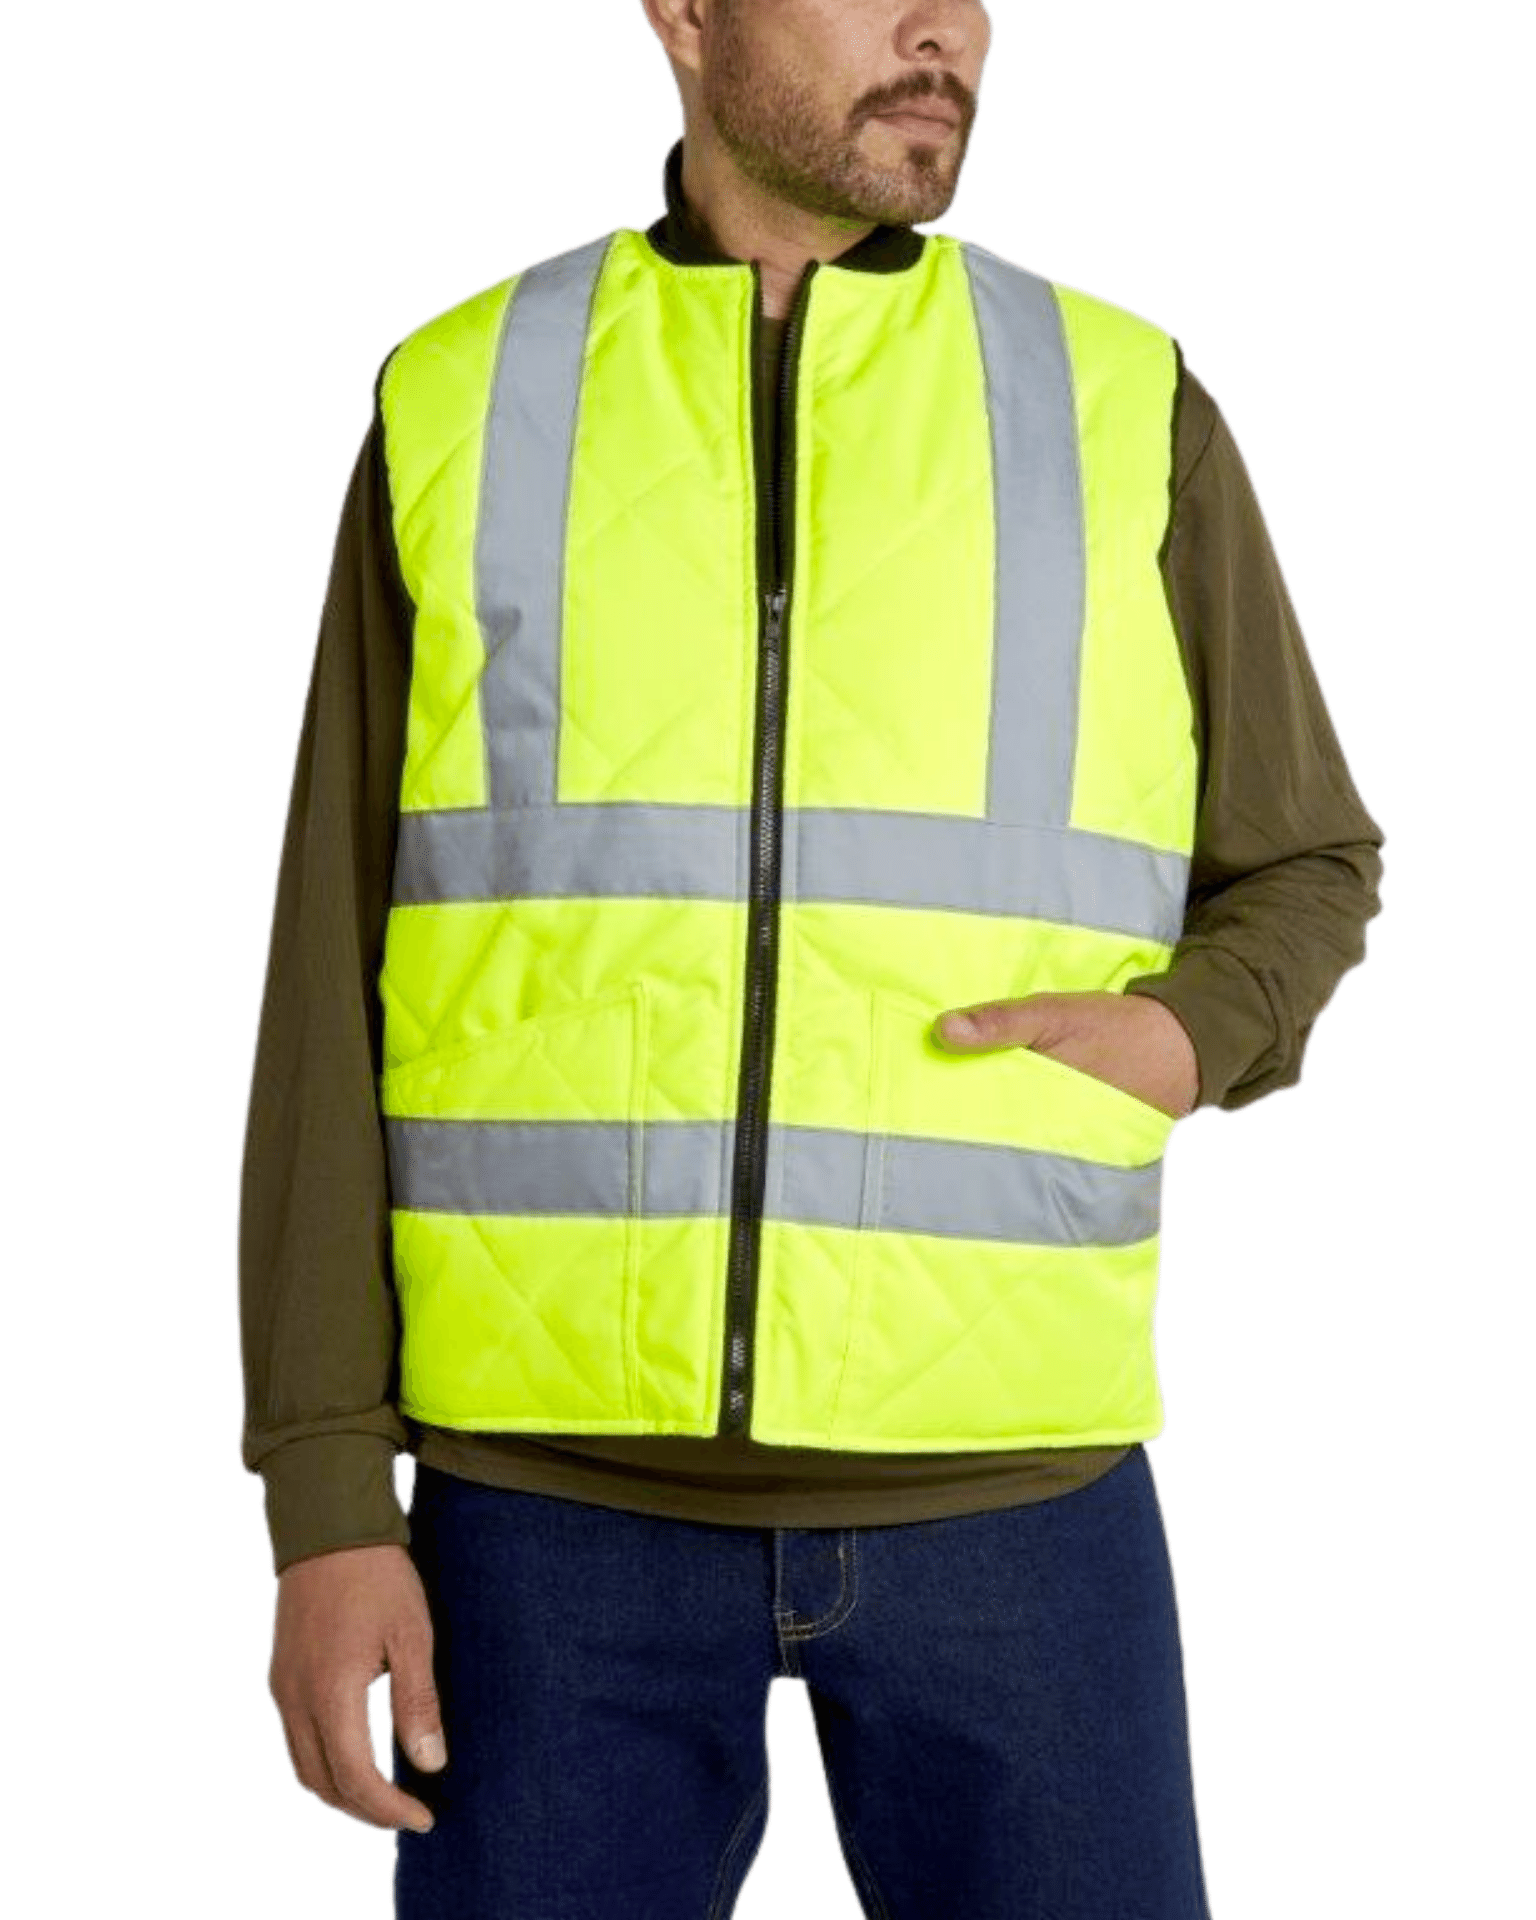 UHV919 HiVis WarmUP Insulated Safety Vest